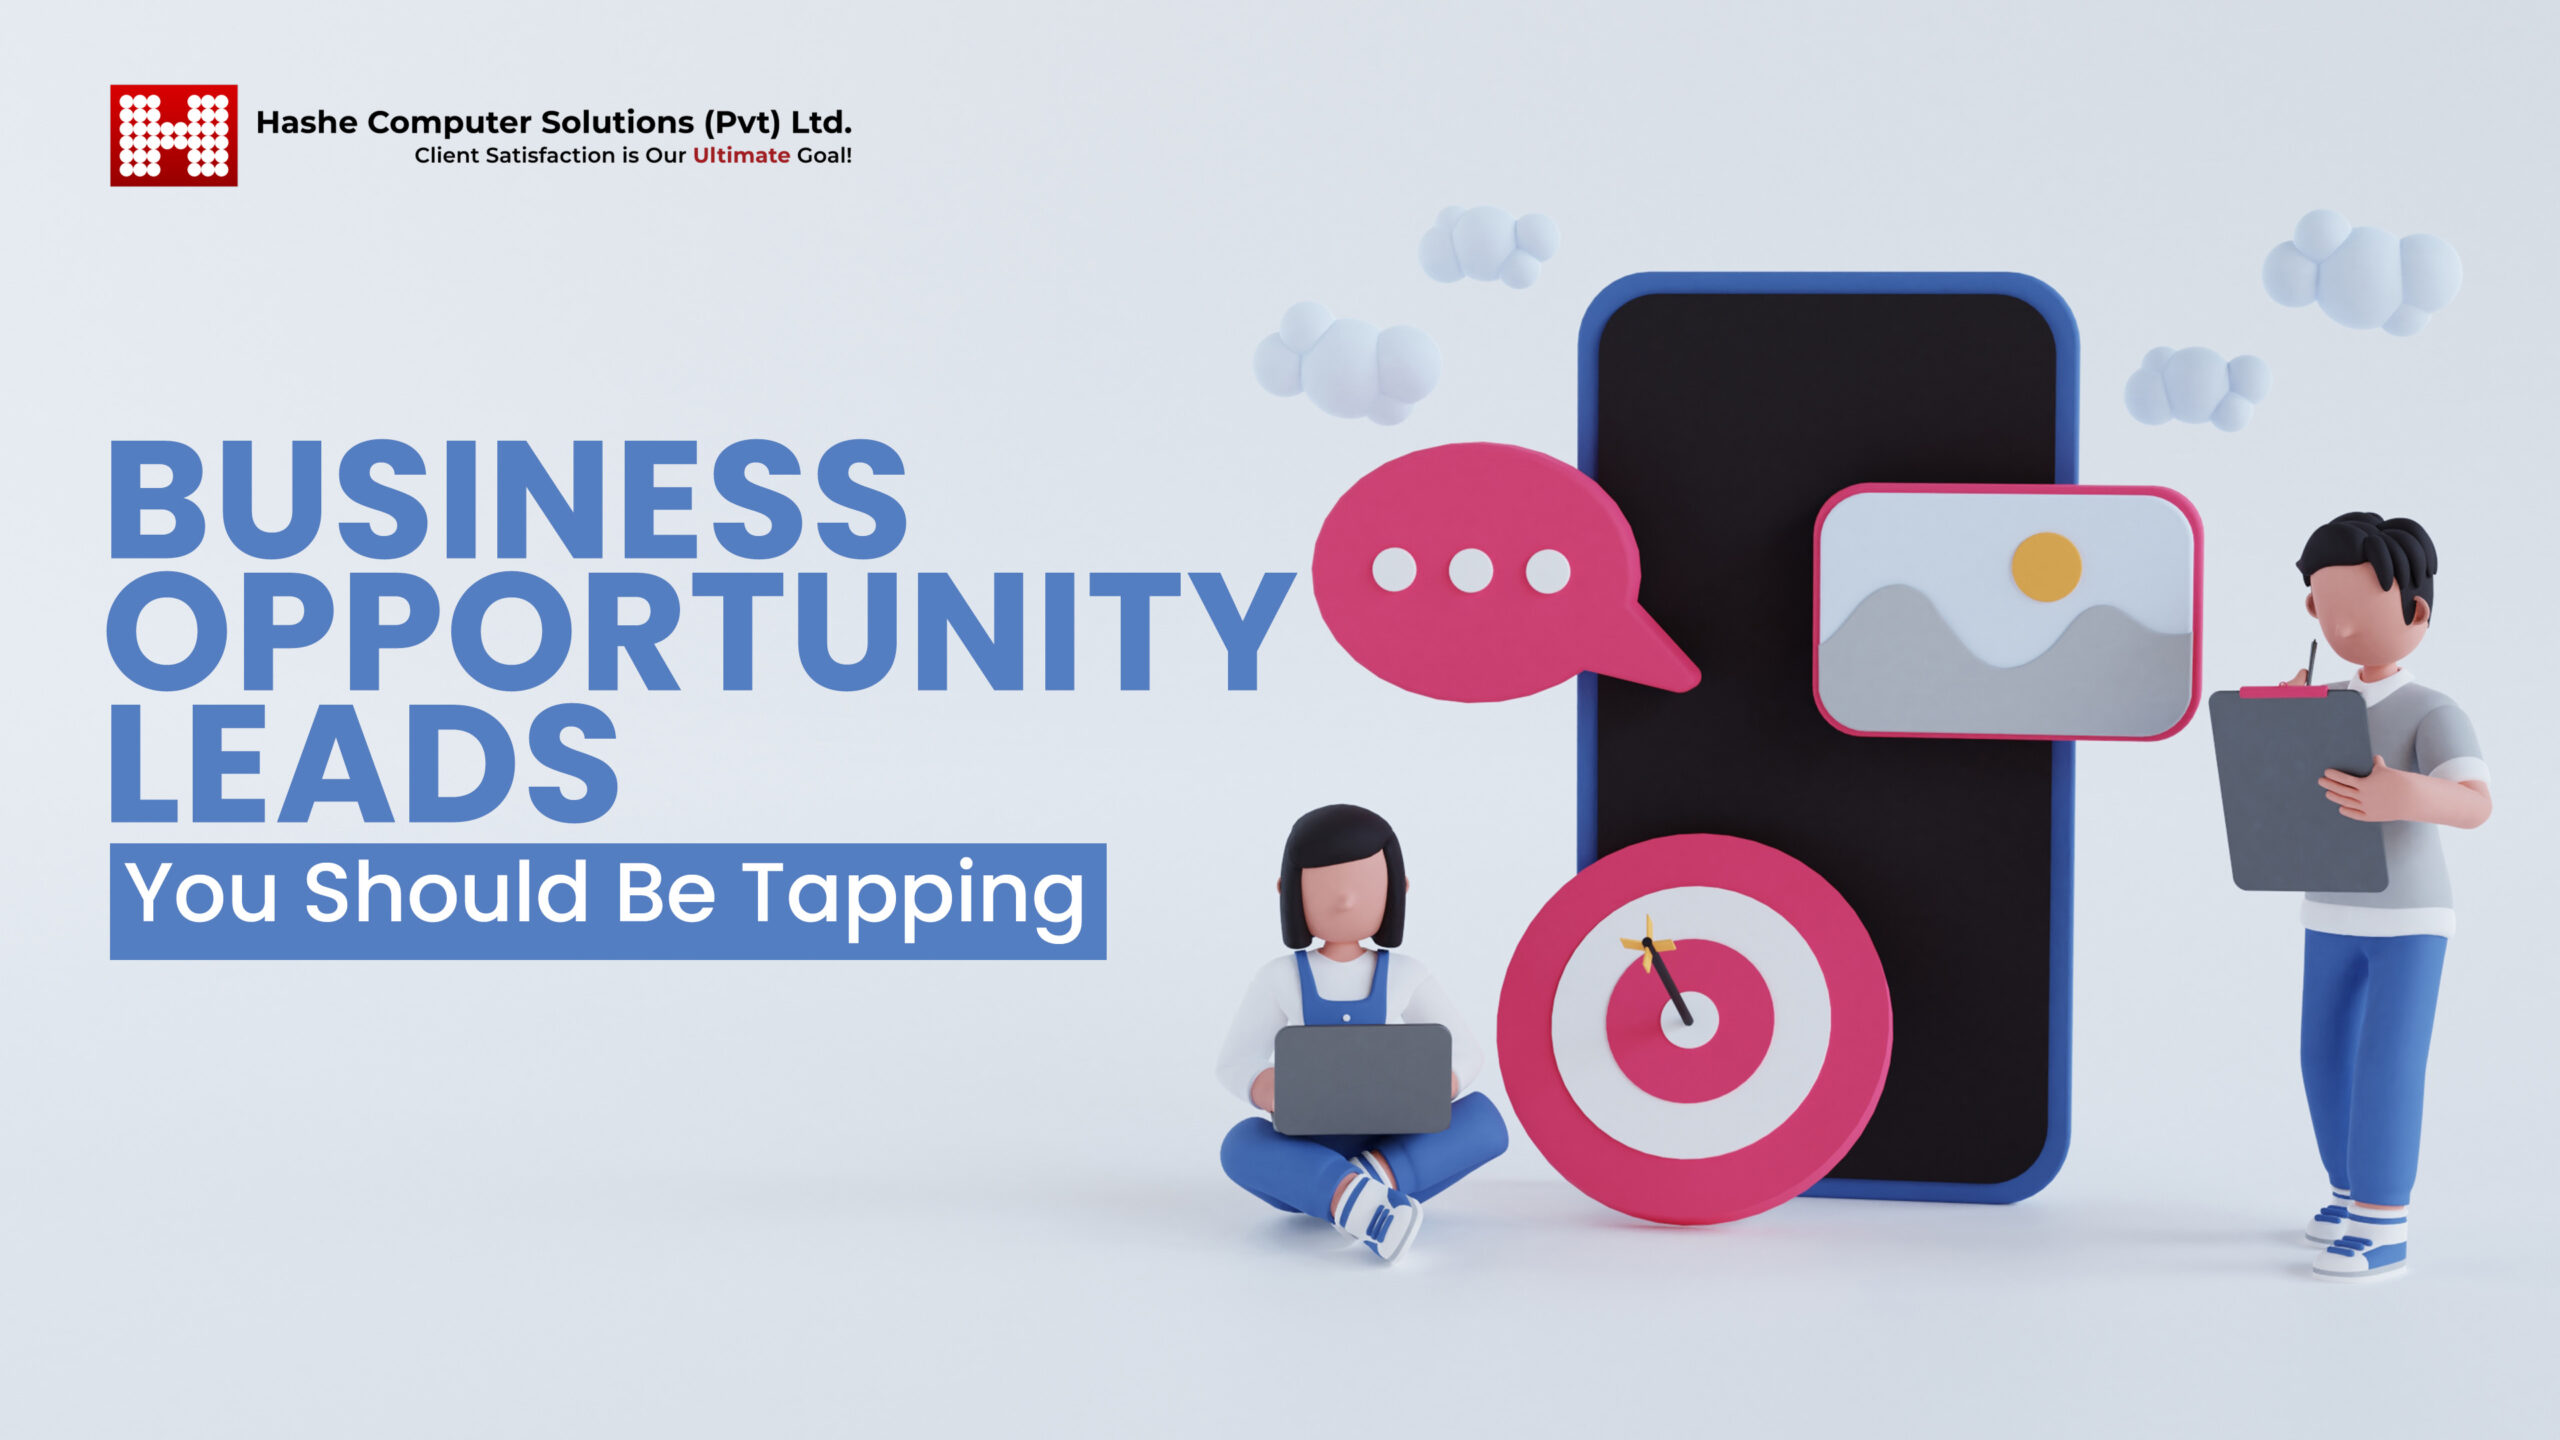 Business Opportunity Leads You Should Be Tapping, Hashe Computer Solutions (Pvt) Ltd.